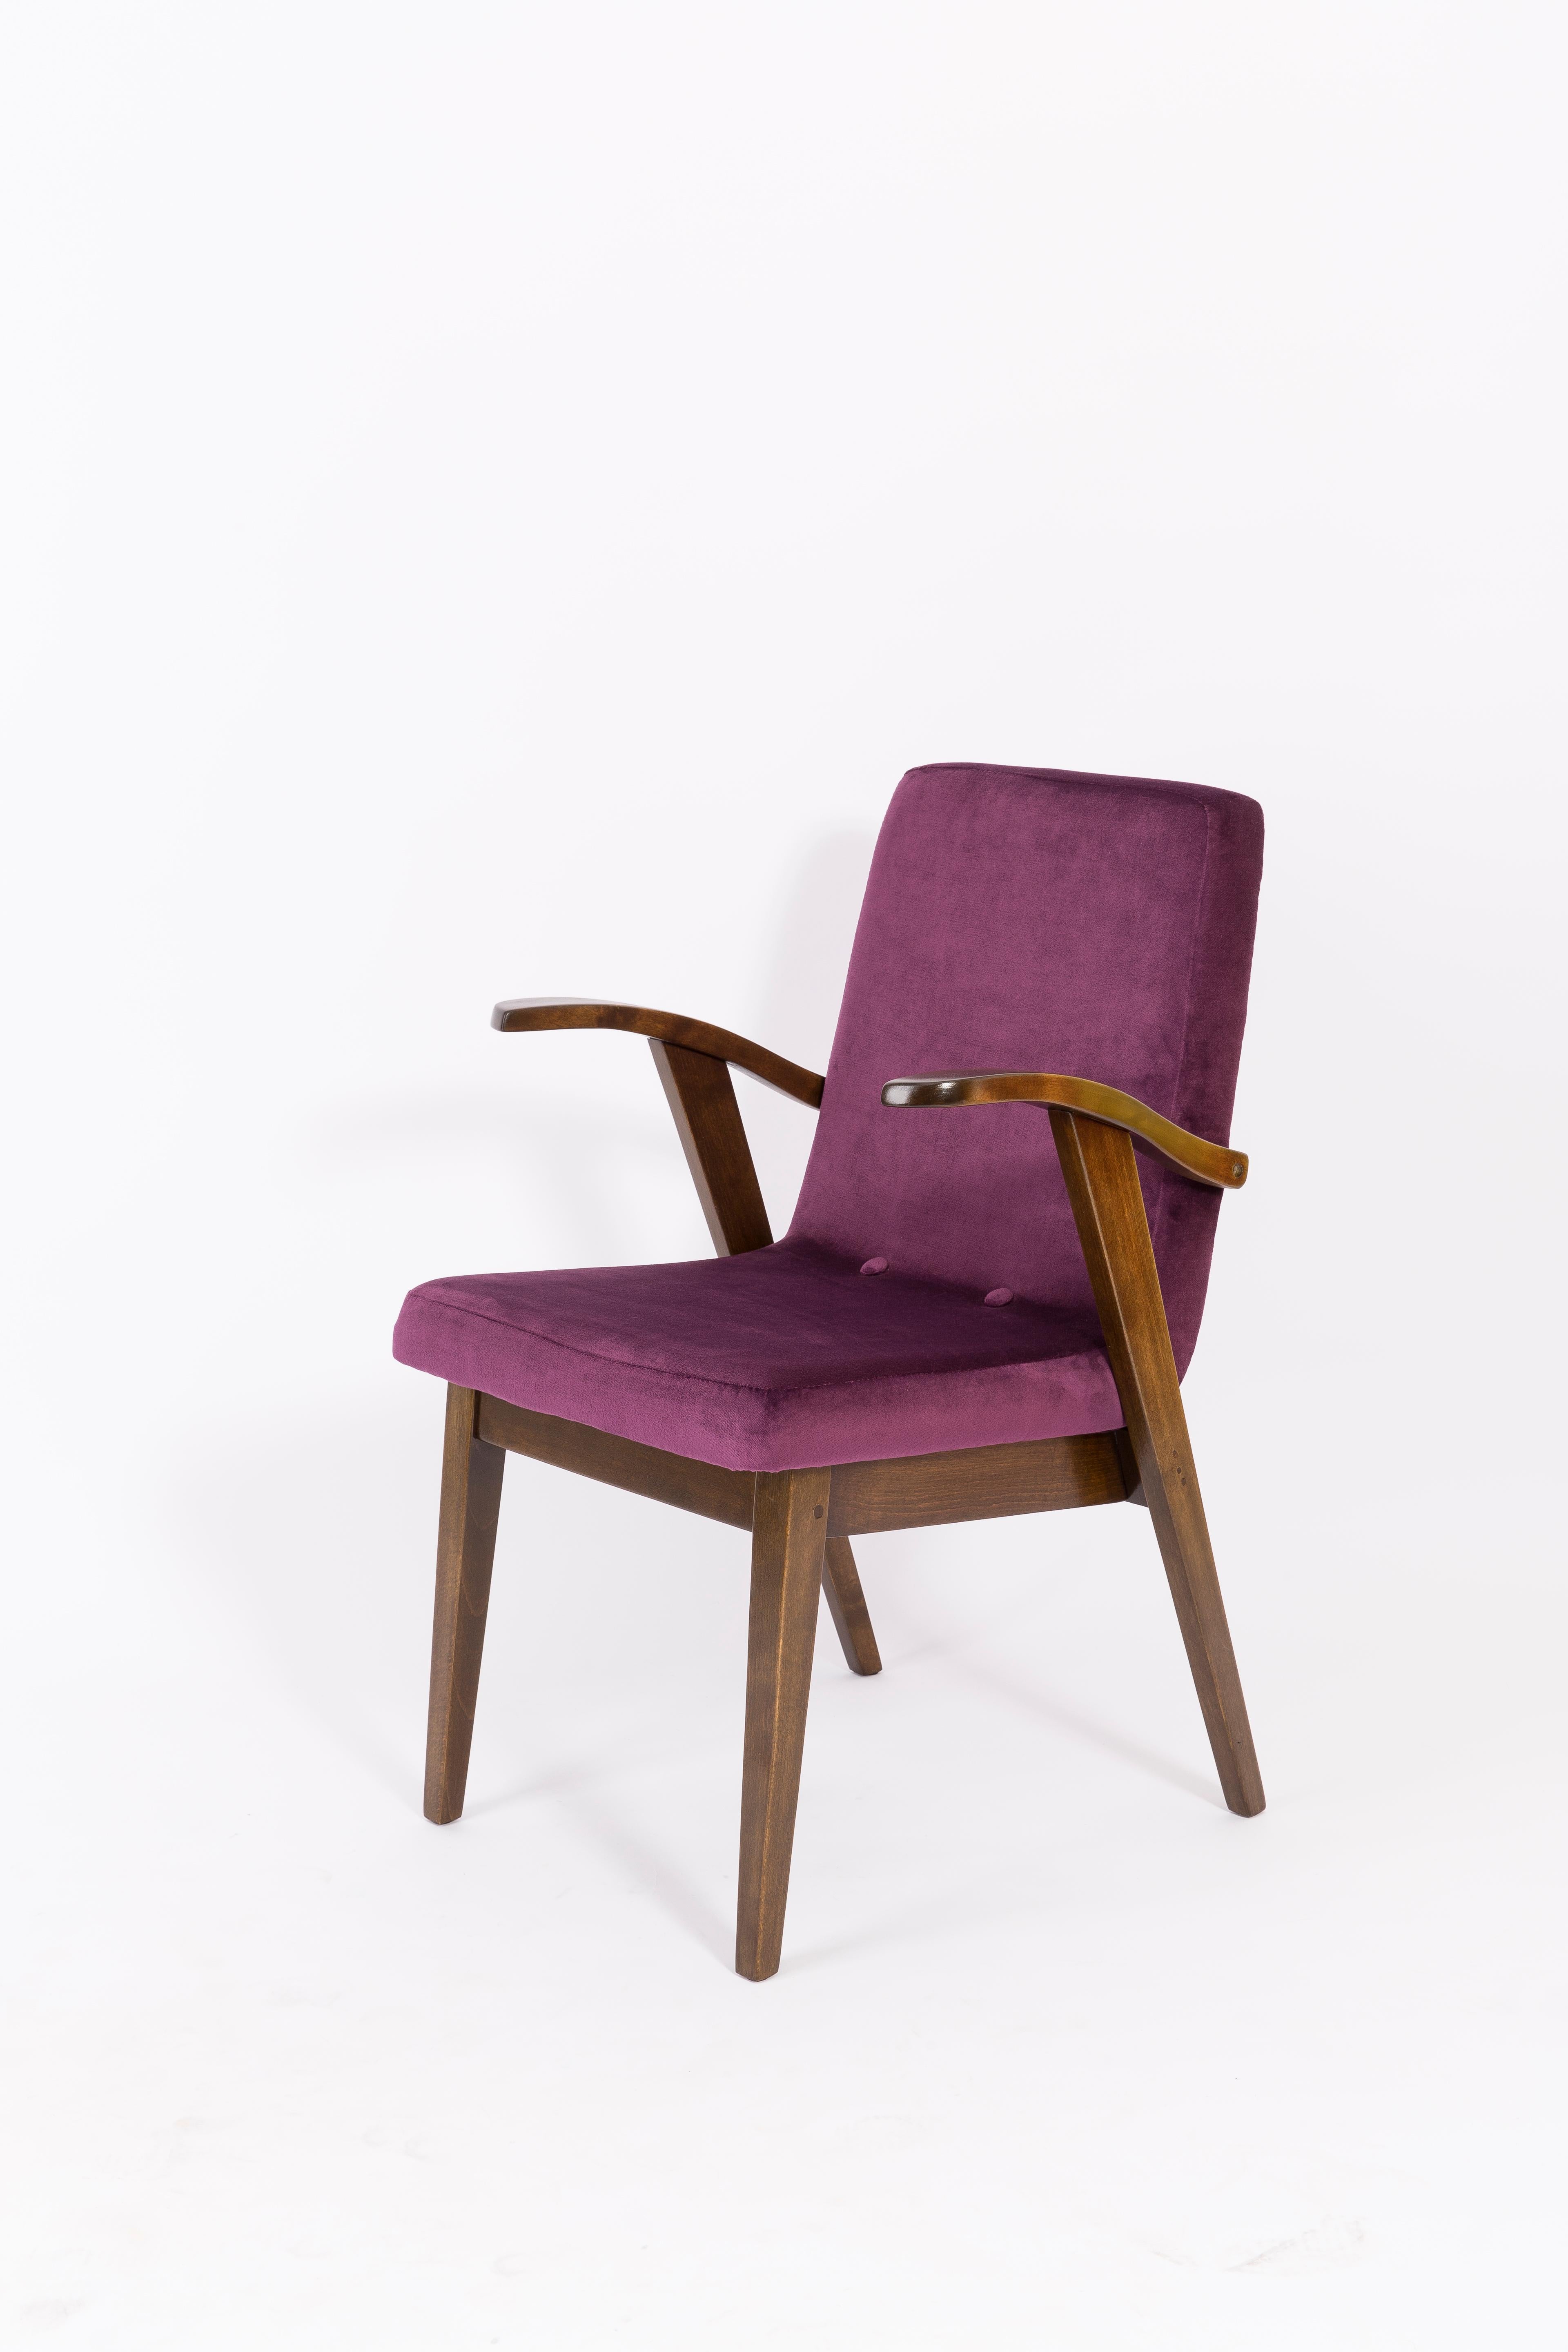 20th Century Vintage Plum Violet Armchair by Mieczyslaw Puchala, 1960s For Sale 1